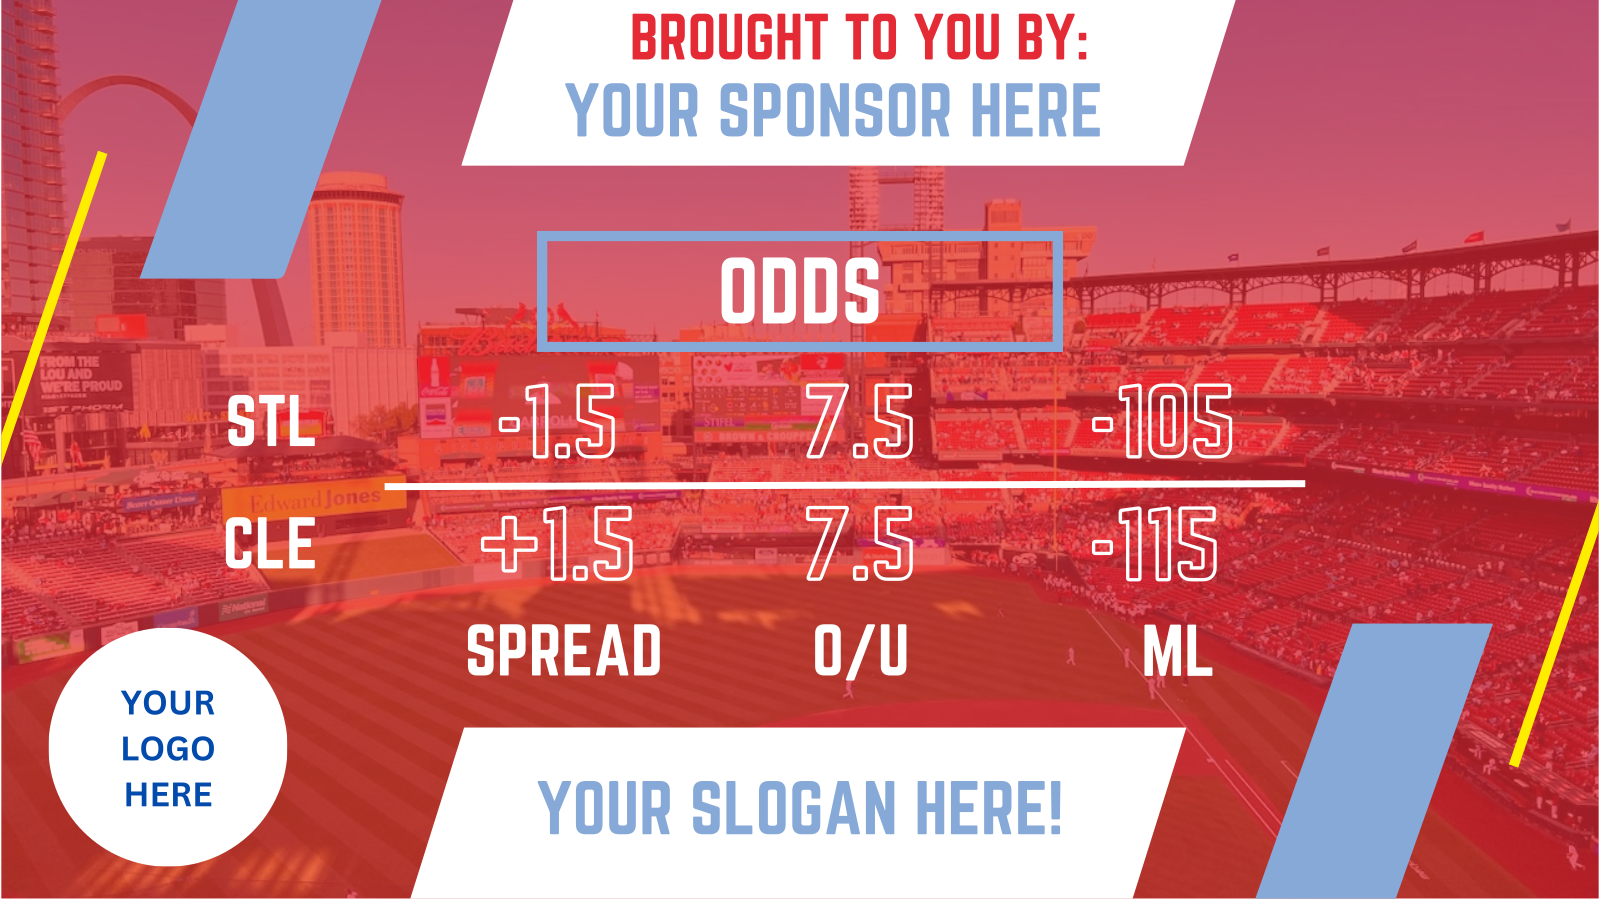 A graphic showing the betting lines for a professional sporting event with a generic logo with 'Your Logo Here' printed on it.